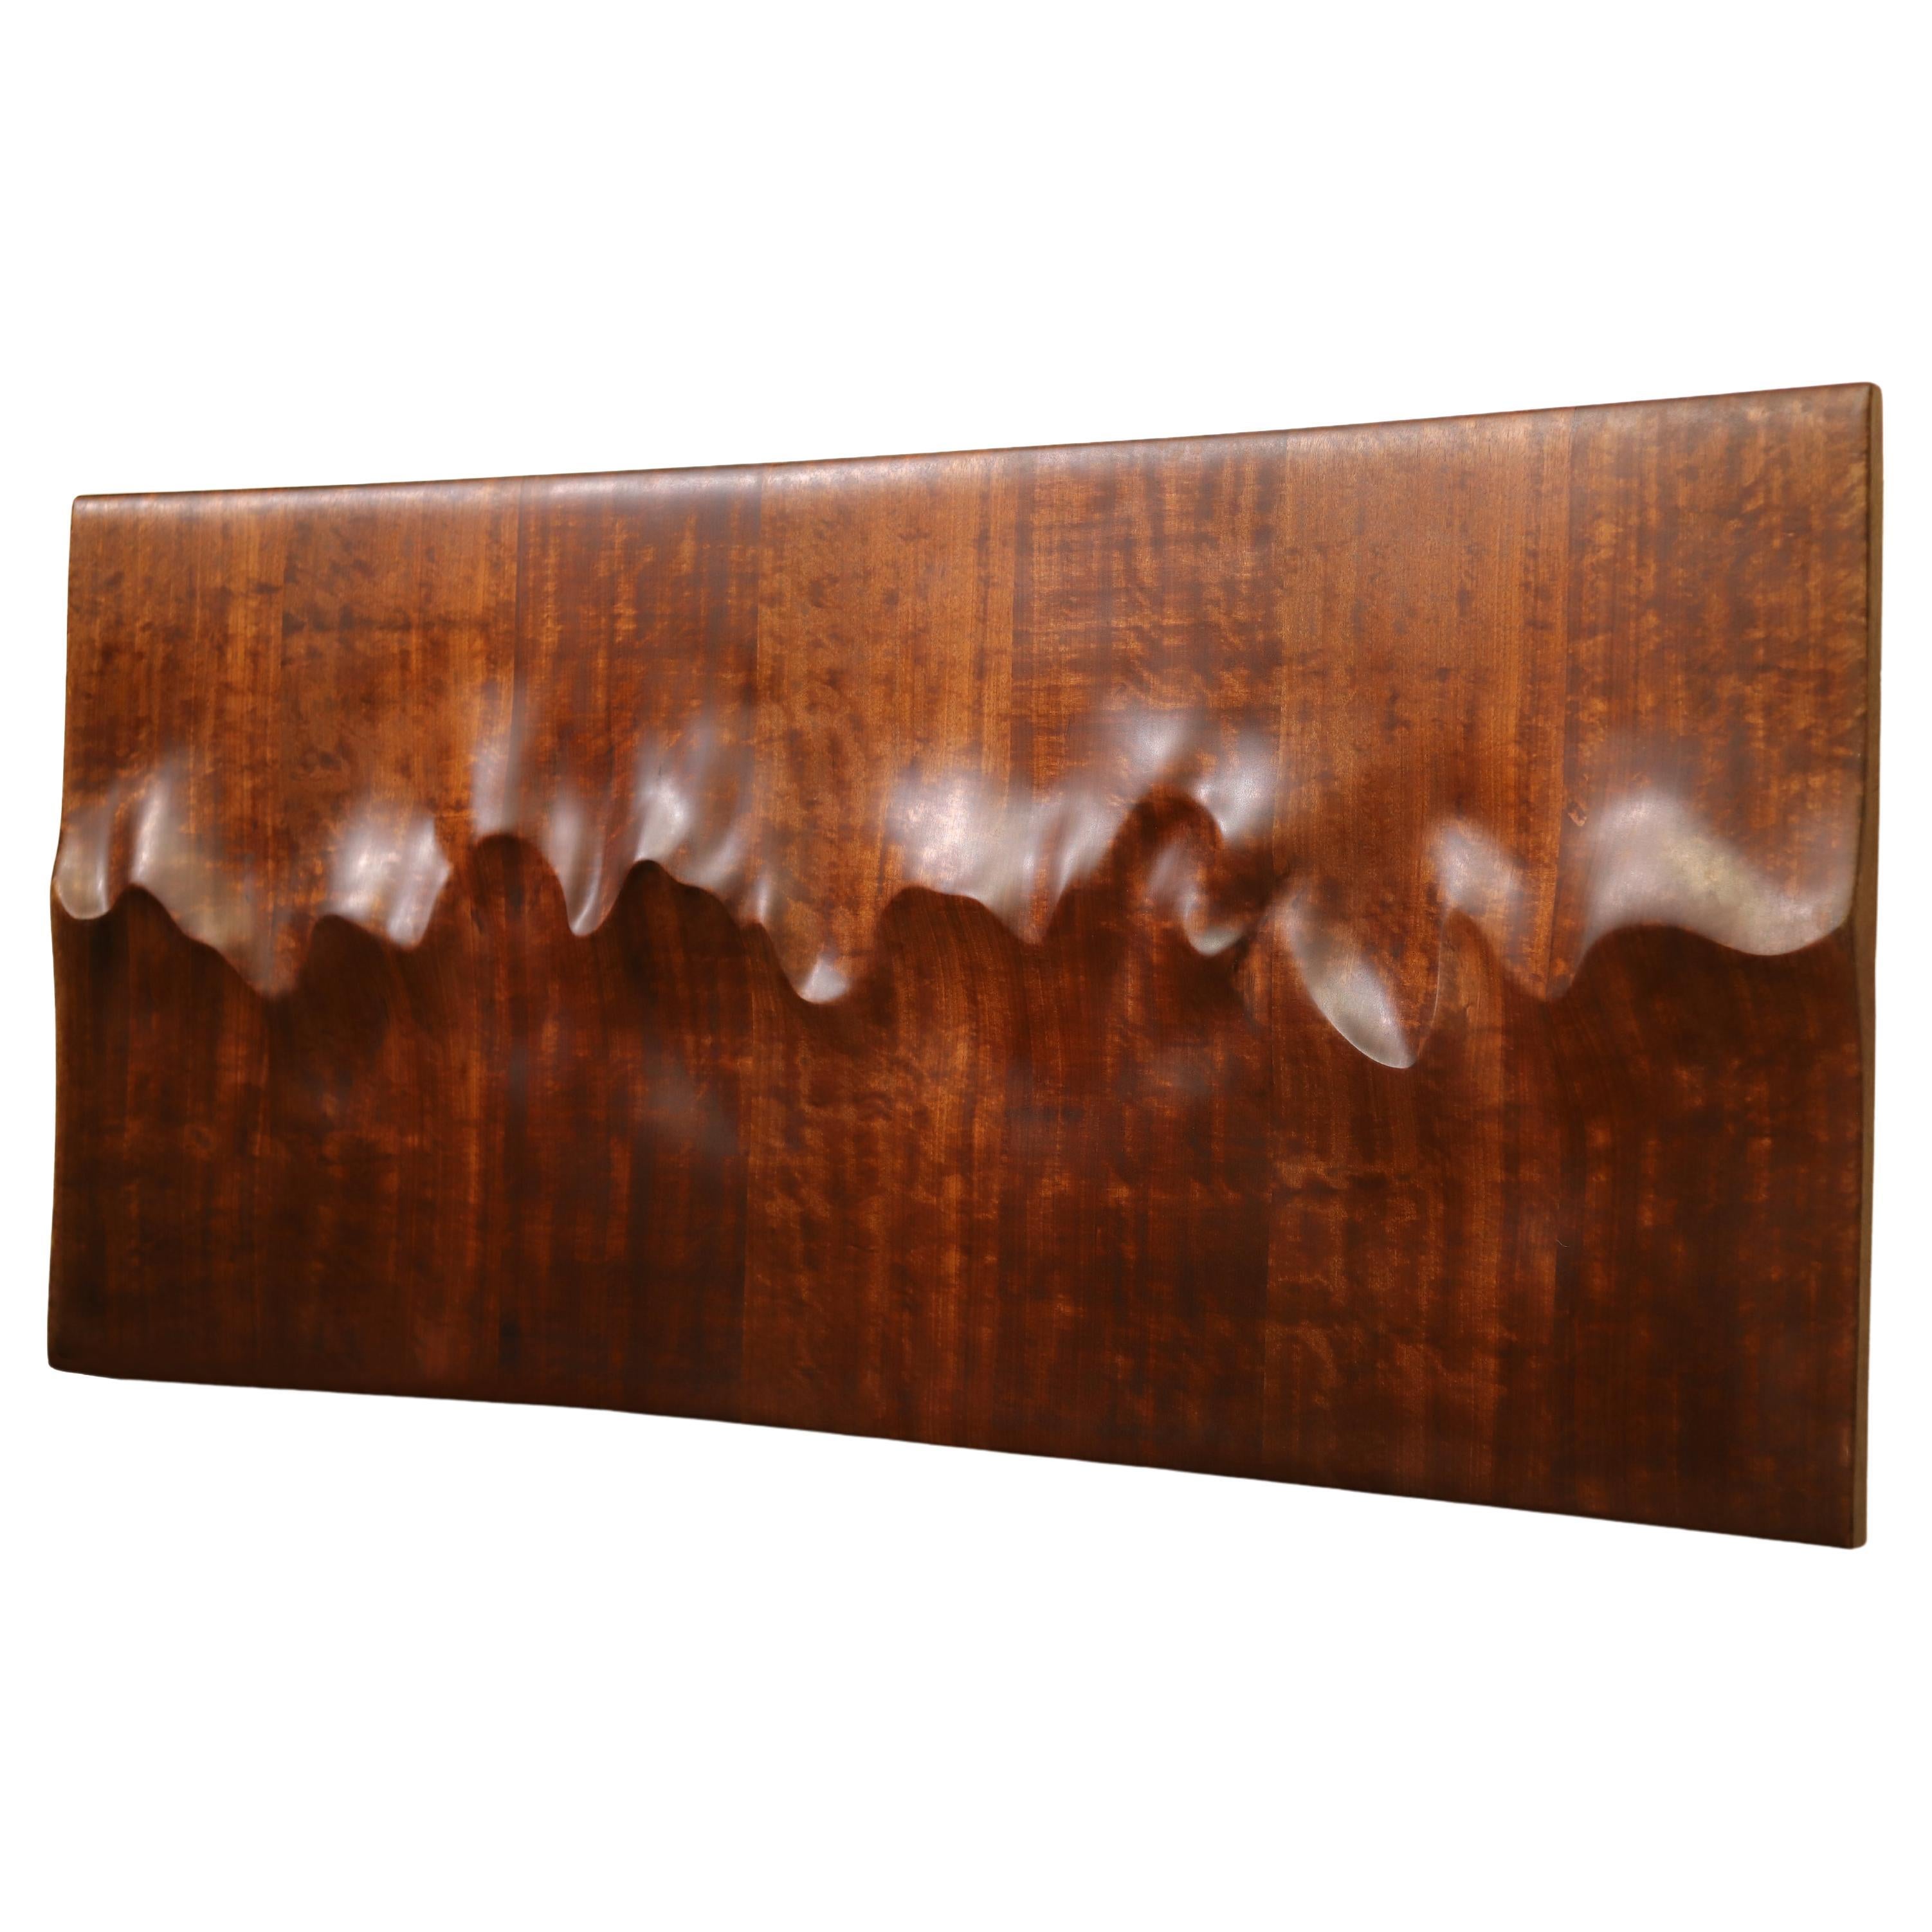 A timeless grand sculpture to place as a wall centerpiece. The artist studied and sketched the Sahara Desert and the Pacific Ocean for months to create the perfect silhouette that captures the essence of both. Its natural forms and organic wooden